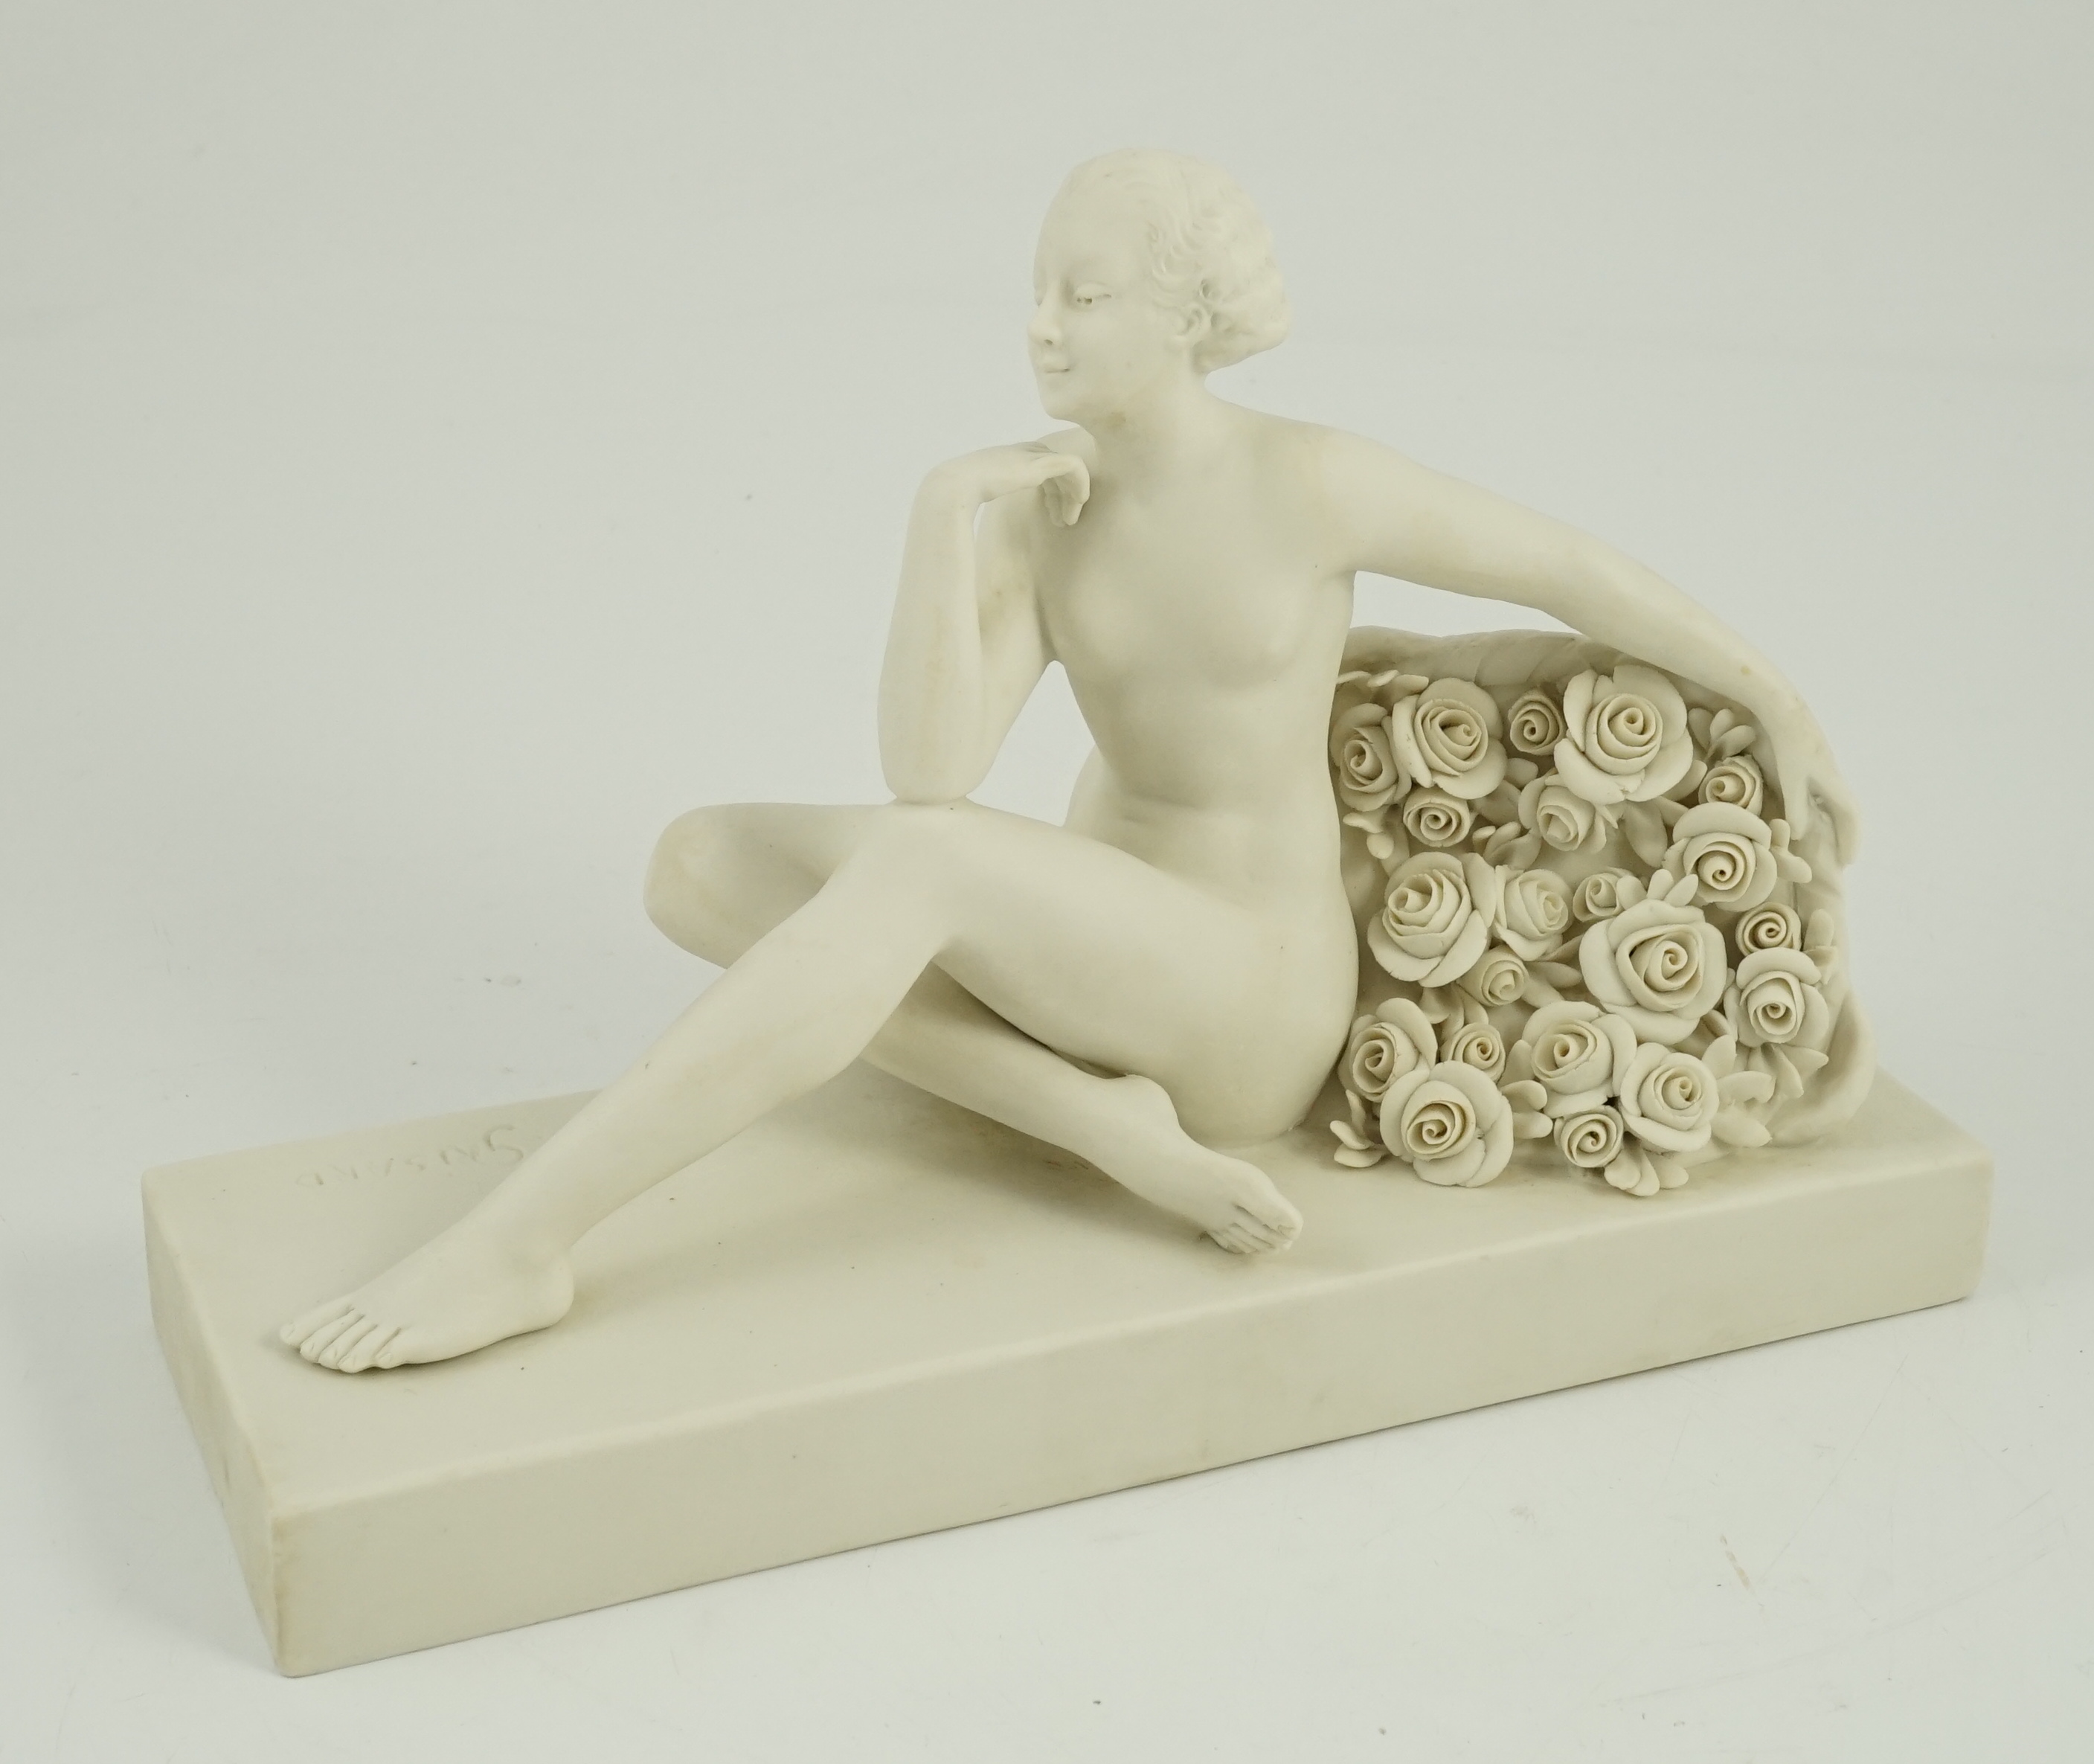 Henri Désiré Grisard (1872 - active until 1940). A signed bisque model of a seated nude by - Image 2 of 5